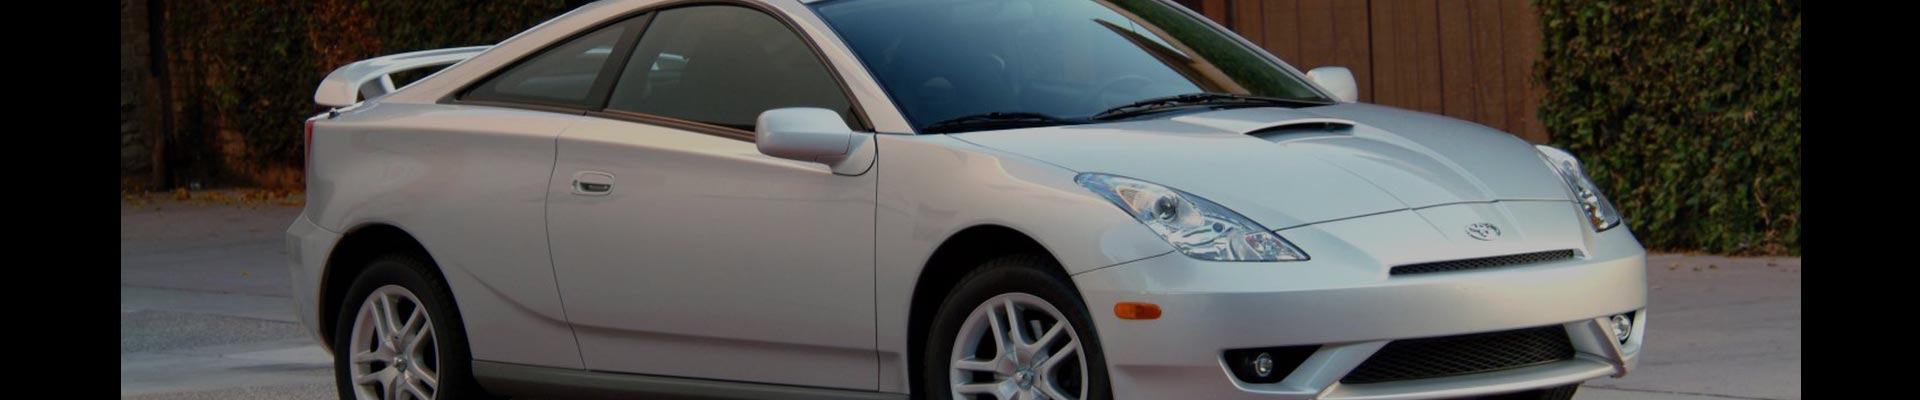 Shop Replacement and OEM 2005 Toyota Celica Parts with Discounted Price on the Net